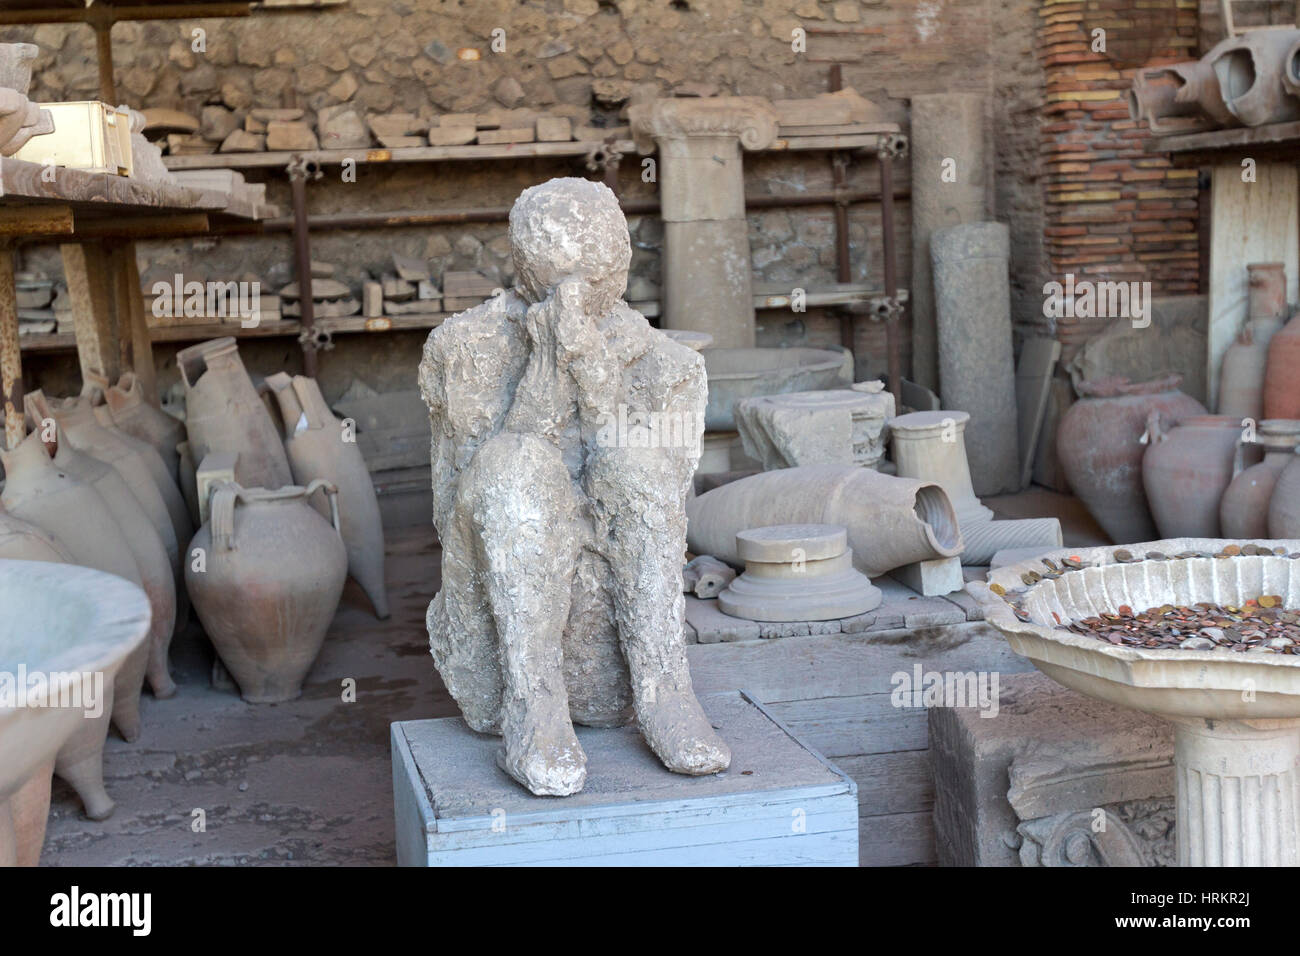 A view ancient ruins in city of Pompeii, Italy. Stock Photo